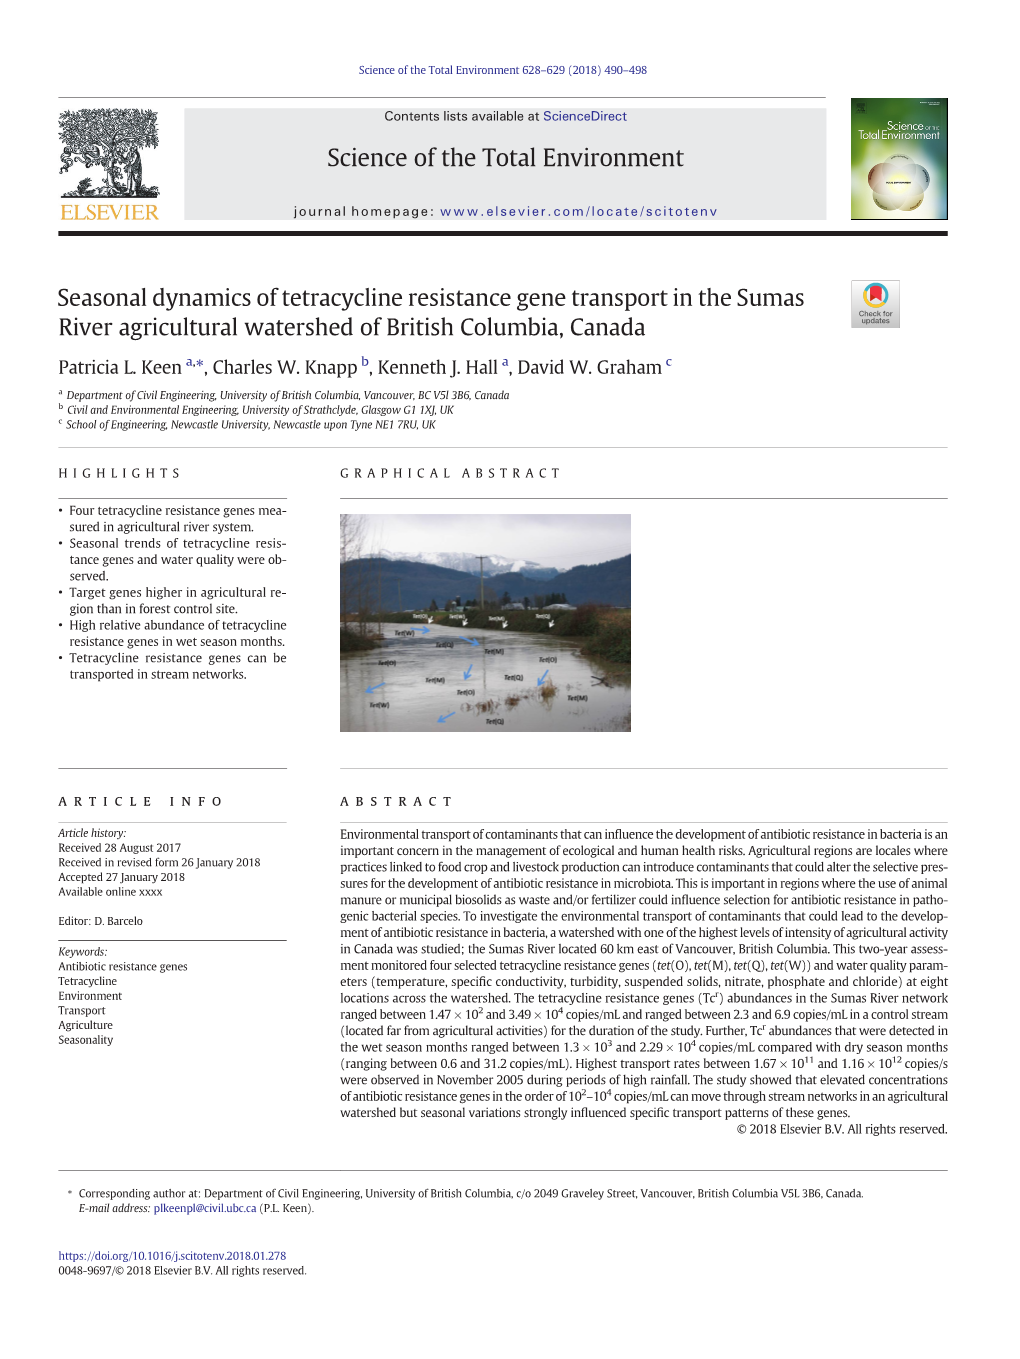 Seasonal Dynamics of Tetracycline Resistance Gene Transport in the Sumas River Agricultural Watershed of British Columbia, Canada